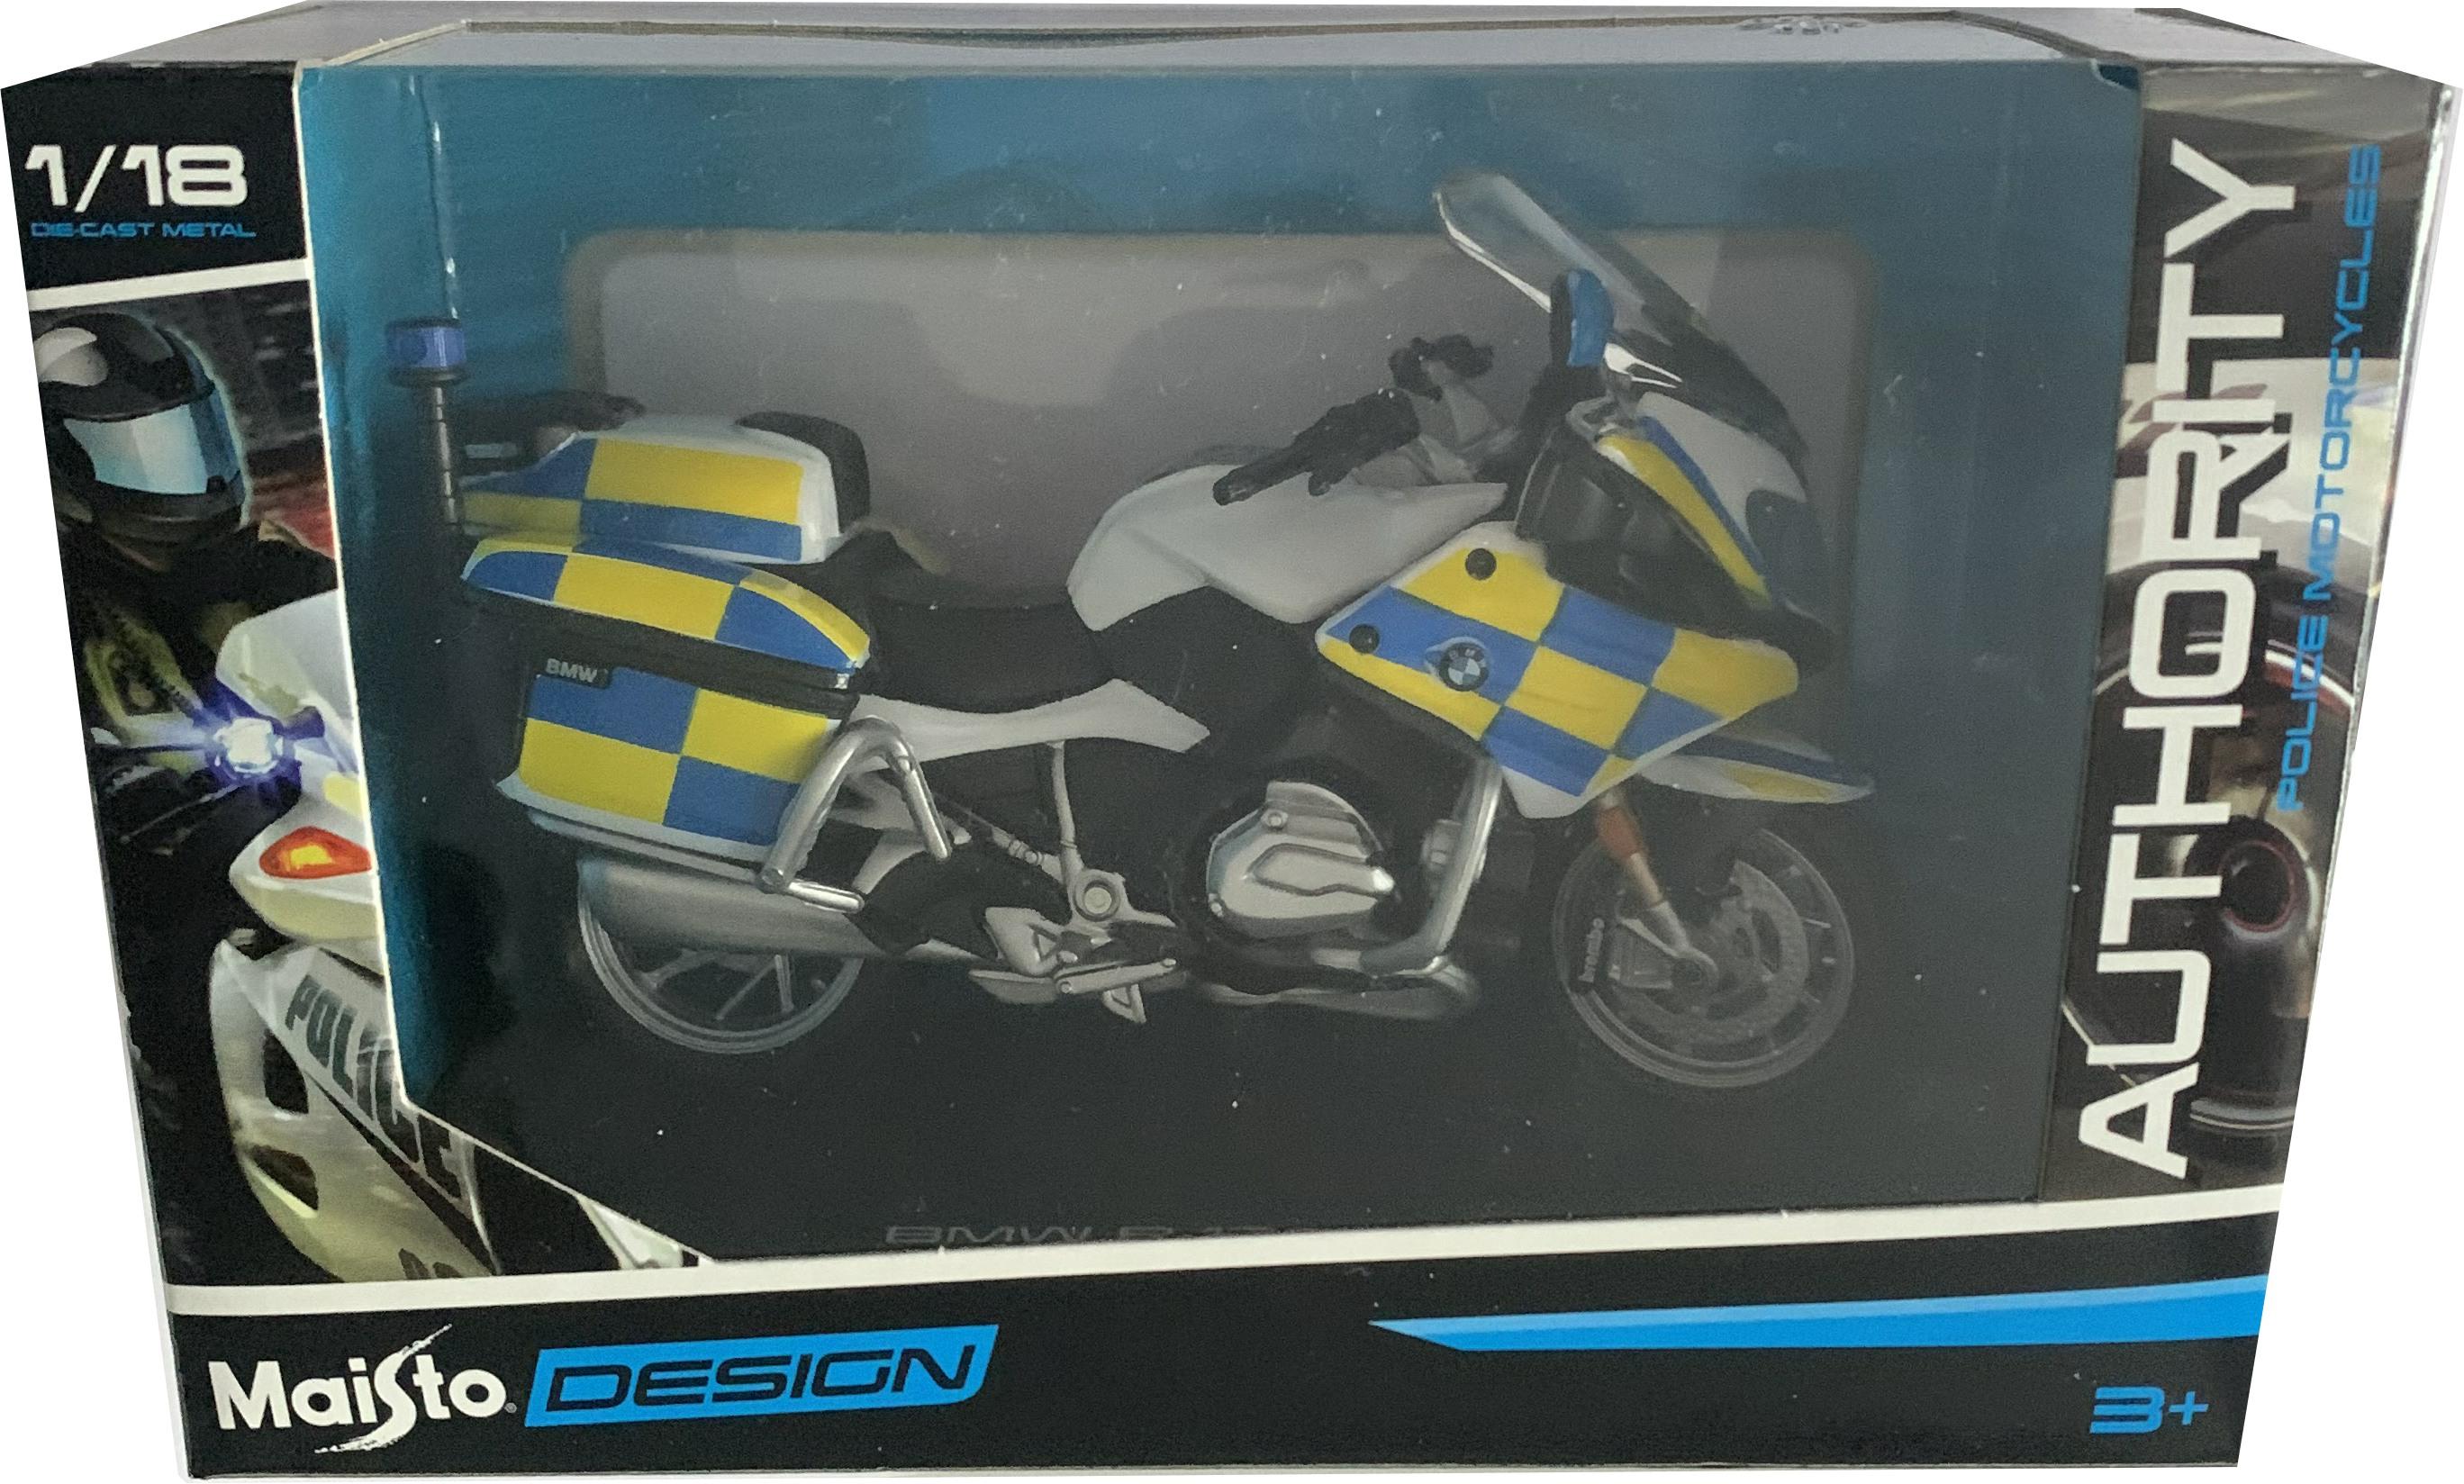 BMW R 1200 RT Police Authority UK 1:18 scale model from Maisto